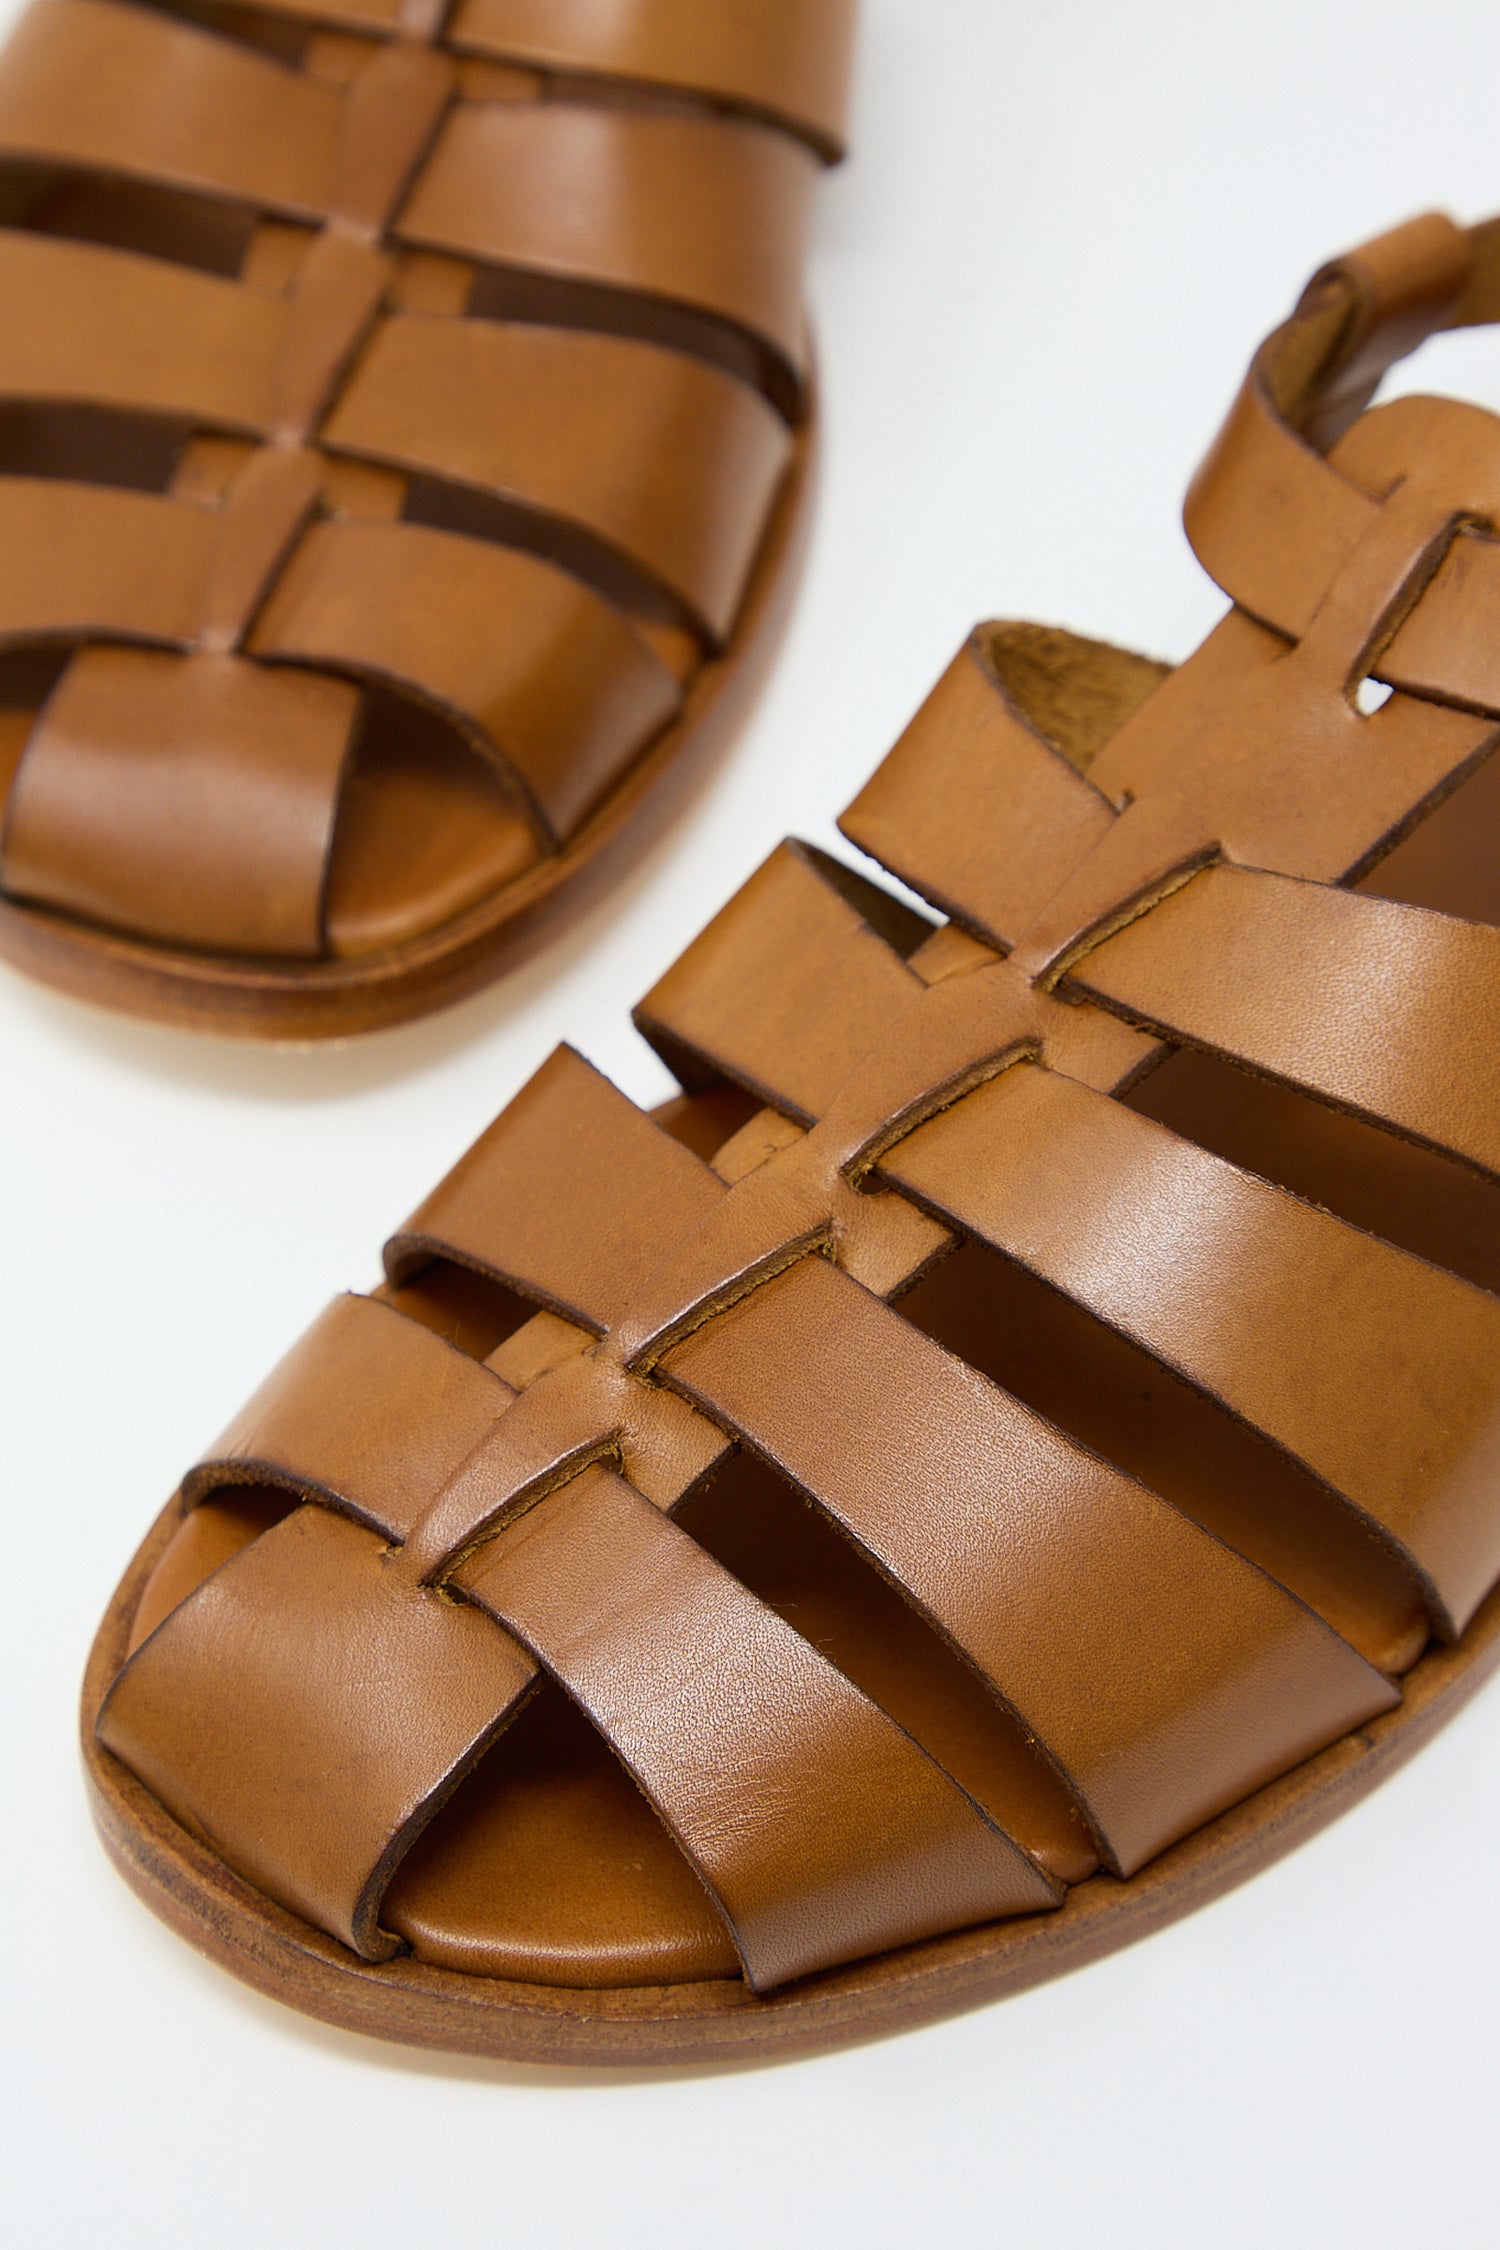 A pair of Dragon Diffusion Pescador Sandal in Tan against a white background.